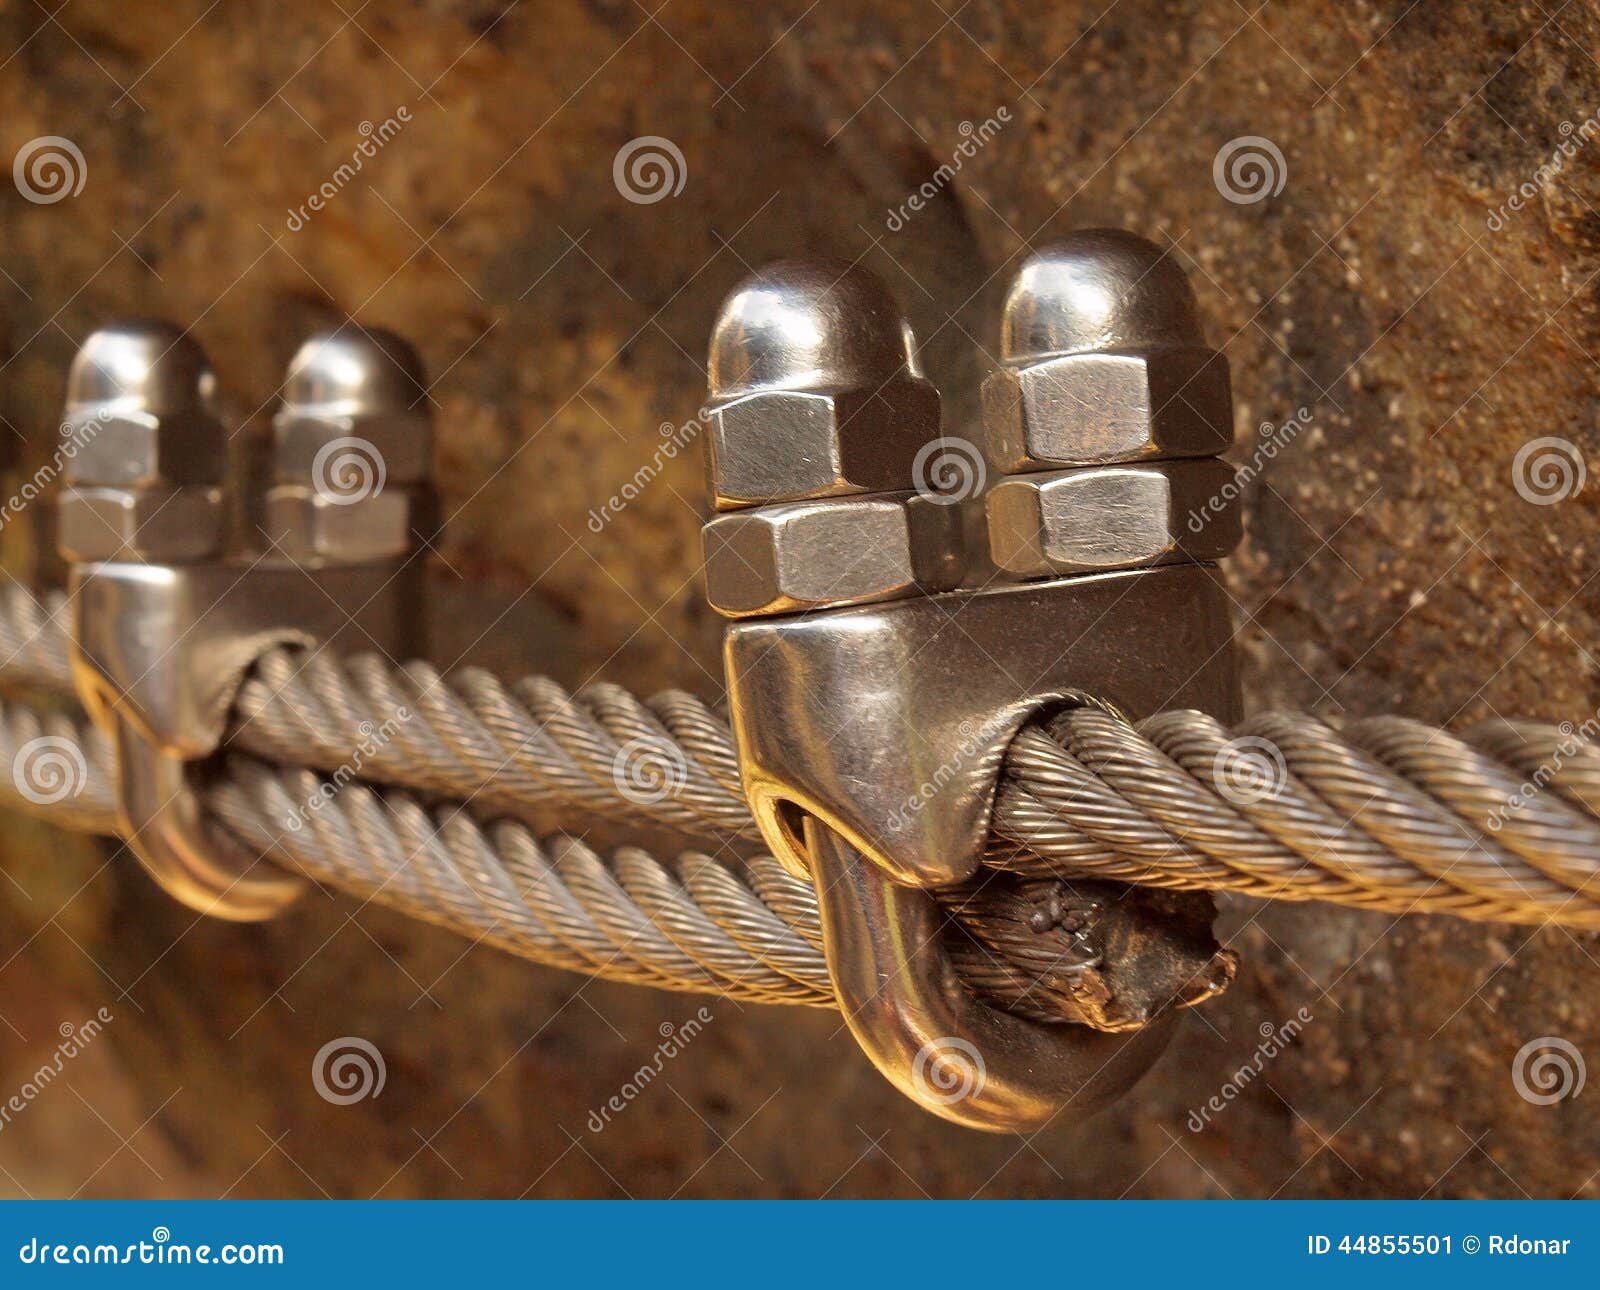 Detail of Clamp at End of Irone Rope. Climbers Iron Twisted Rope